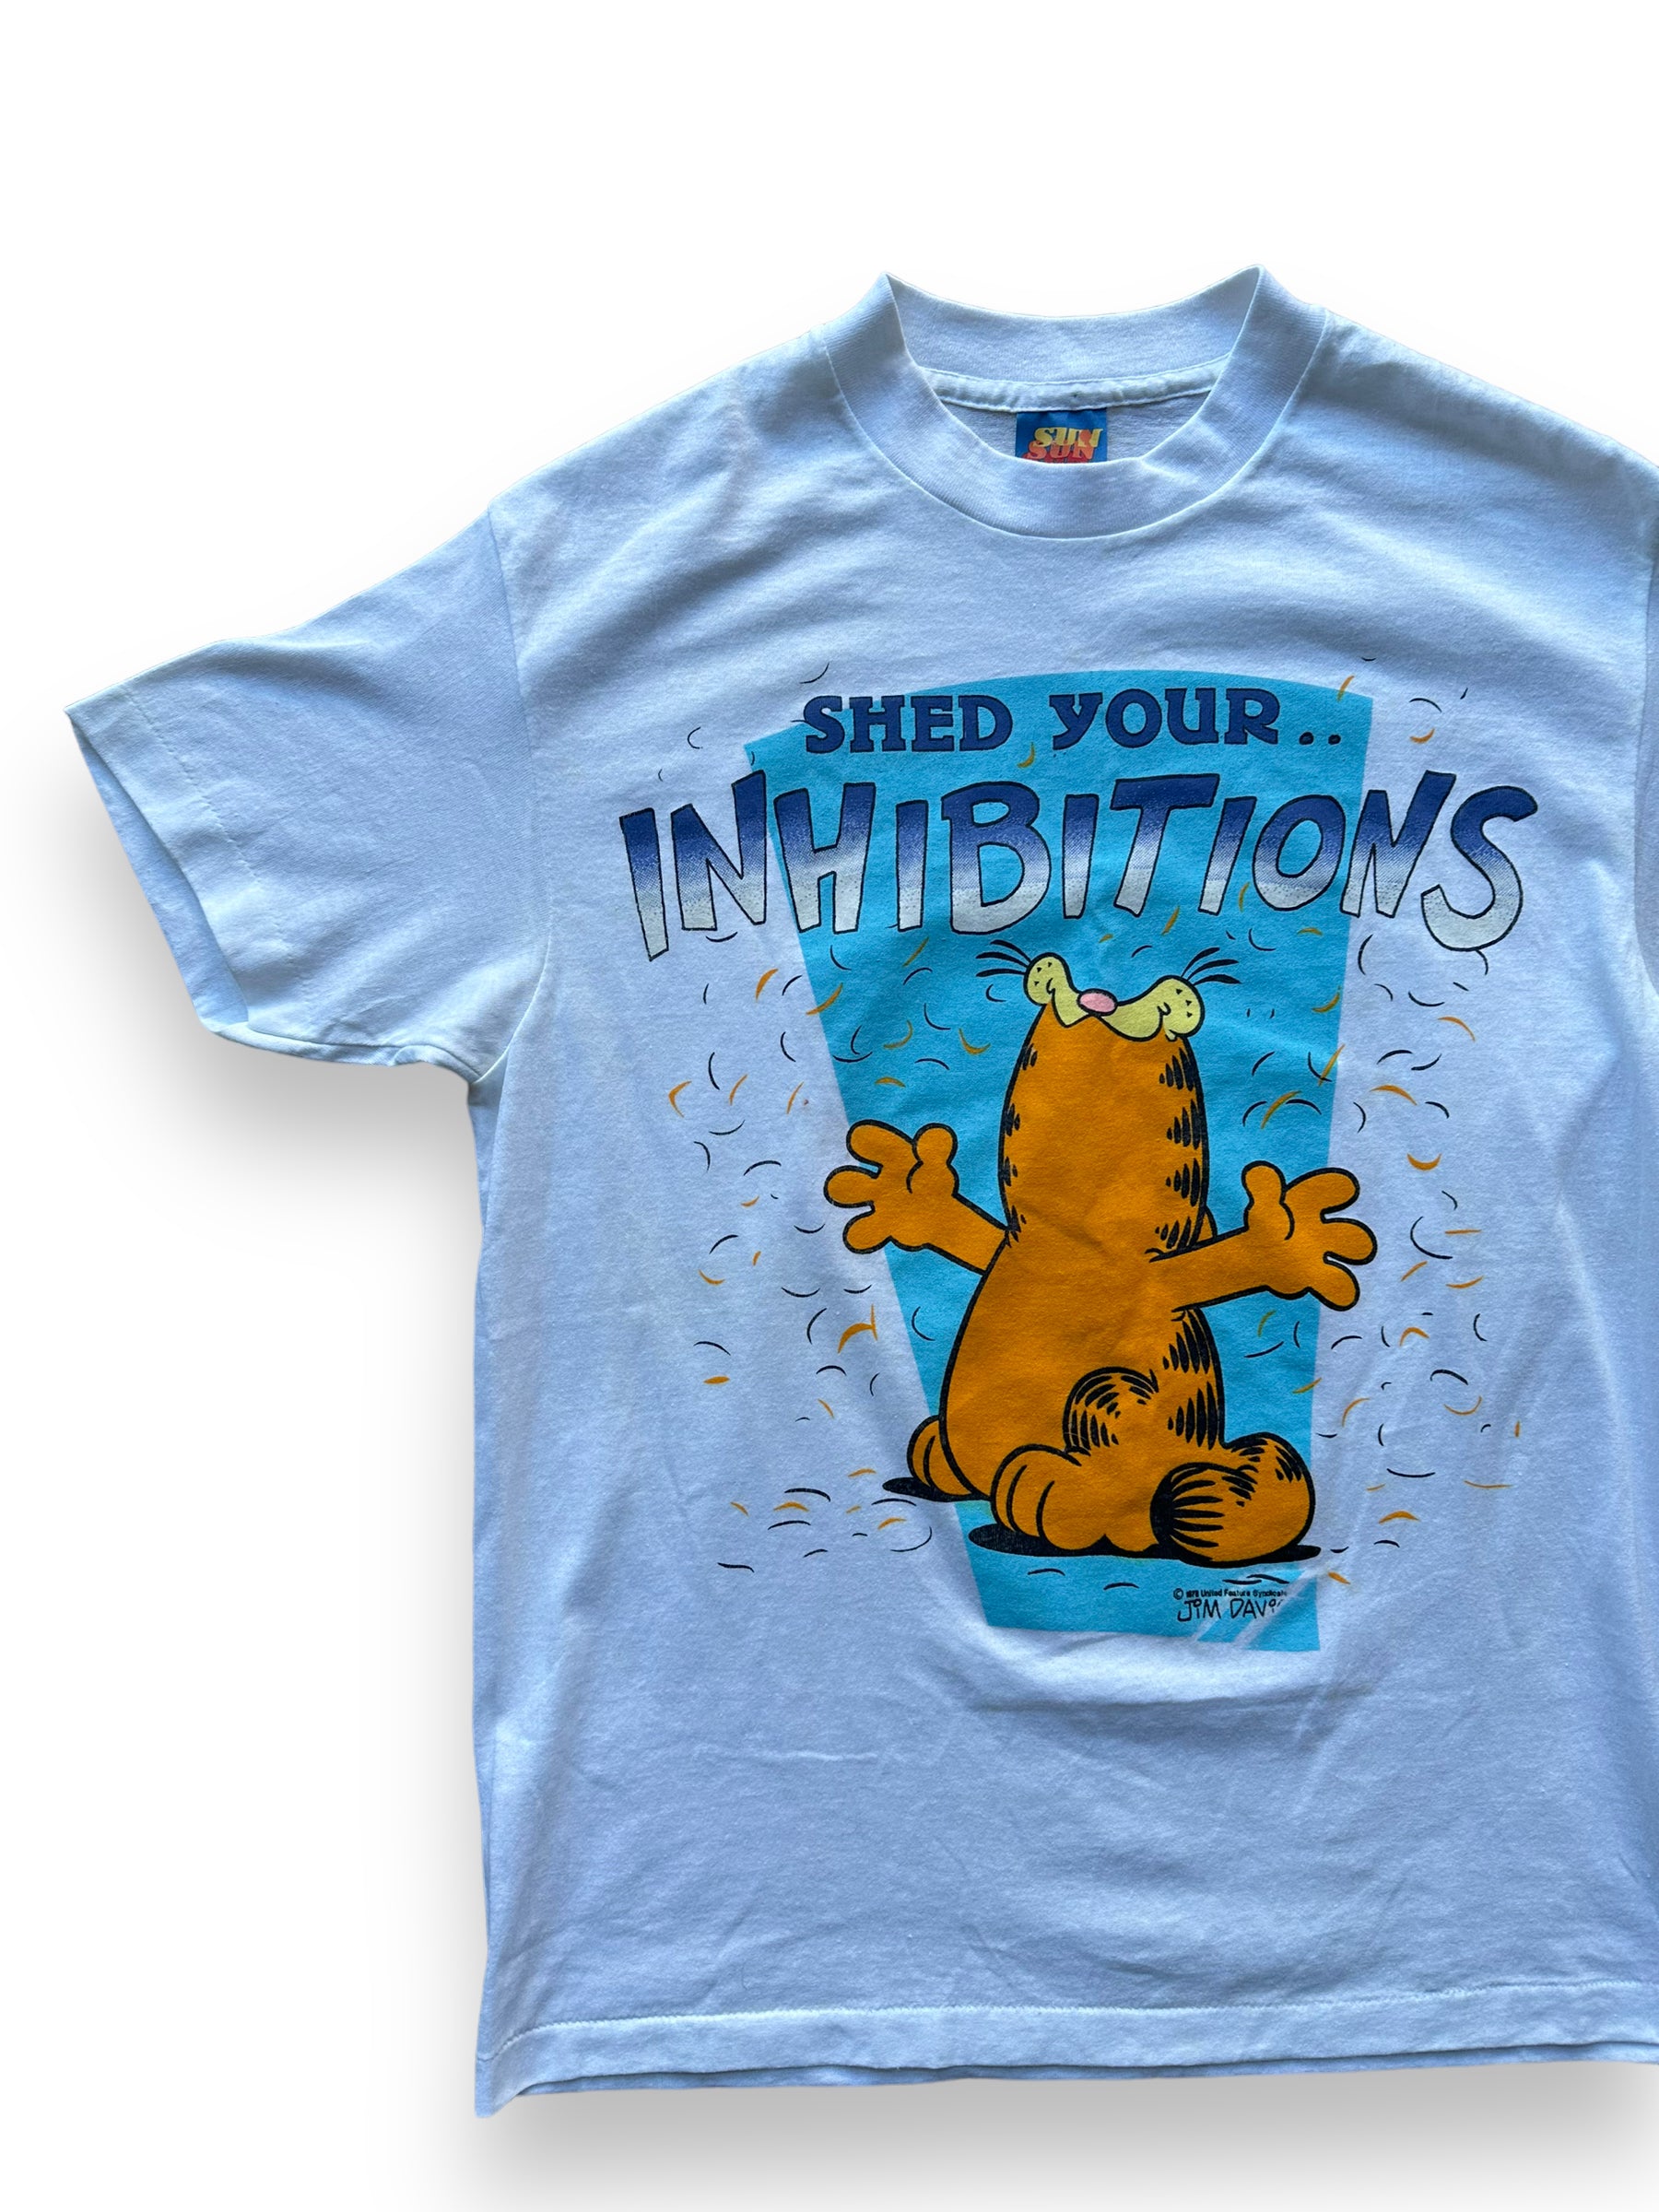 Front right of Vintage Garfield "Shed Your Inhibitions" Tee SZ M |  Vintage Cat Tee Seattle | Barn Owl Vintage